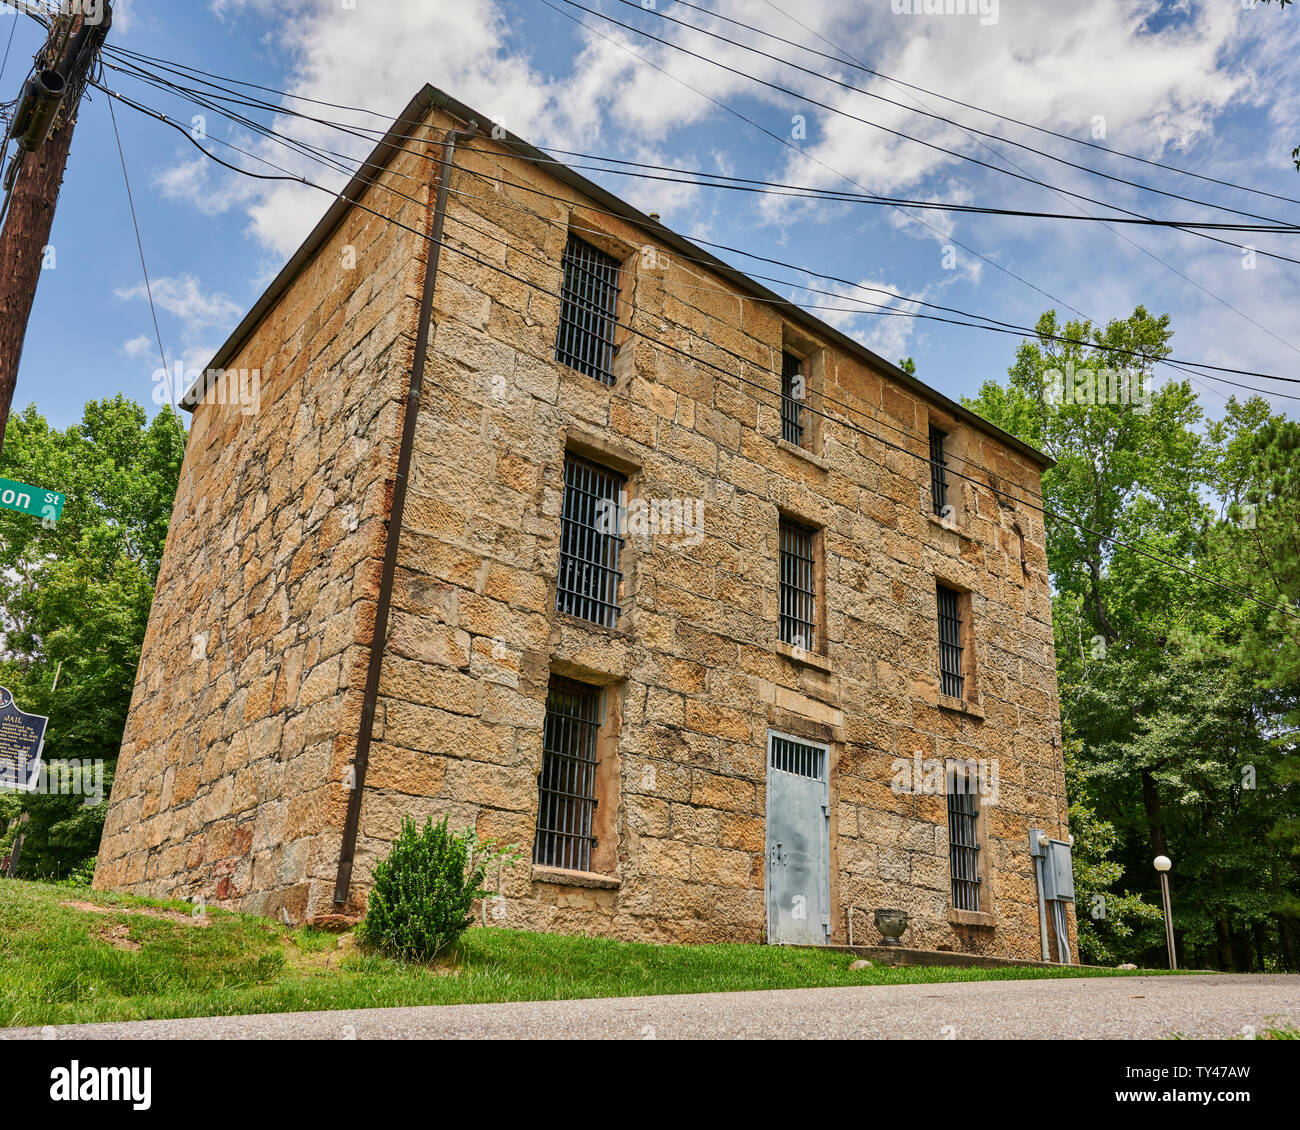 Old stone jail from the 1800's still standing in Rockford Alabama, USA. Stock Photo